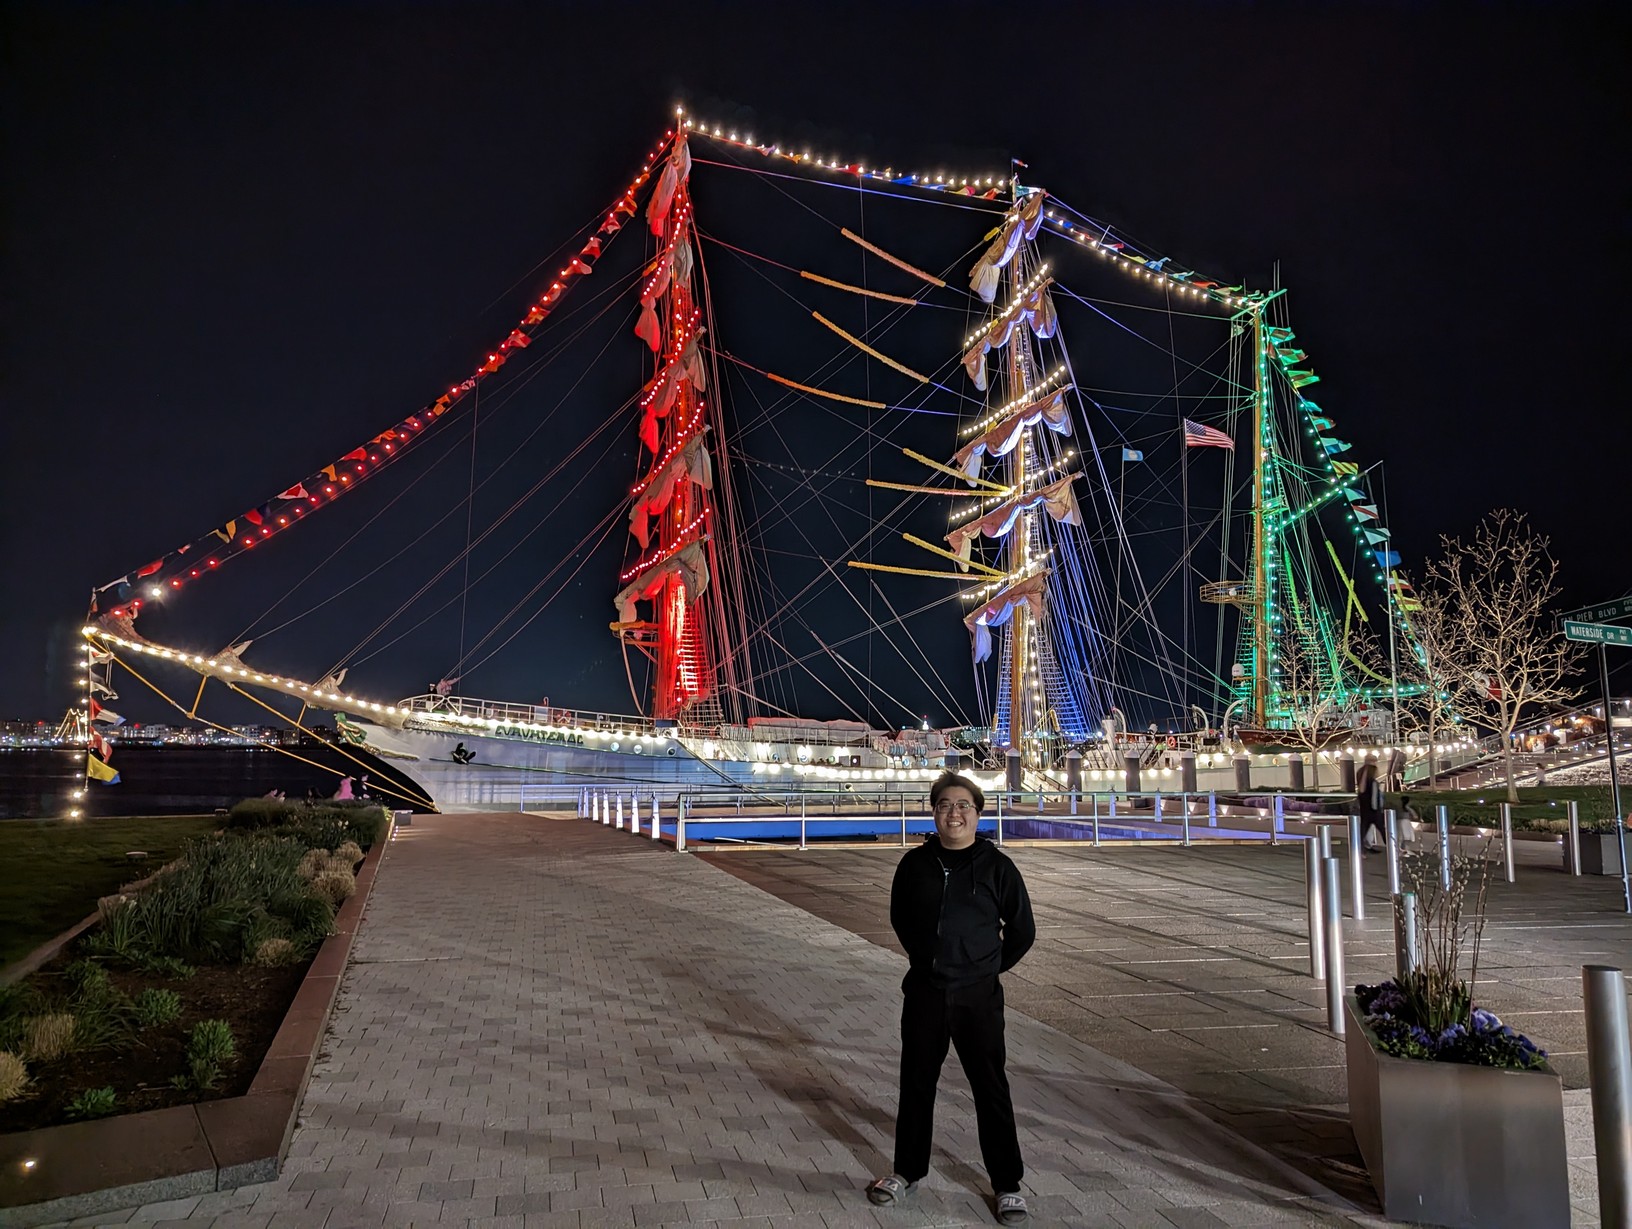 Me standing in front of the Cuauhtémoc. The masts lit up and in the color of the Mexican flag.